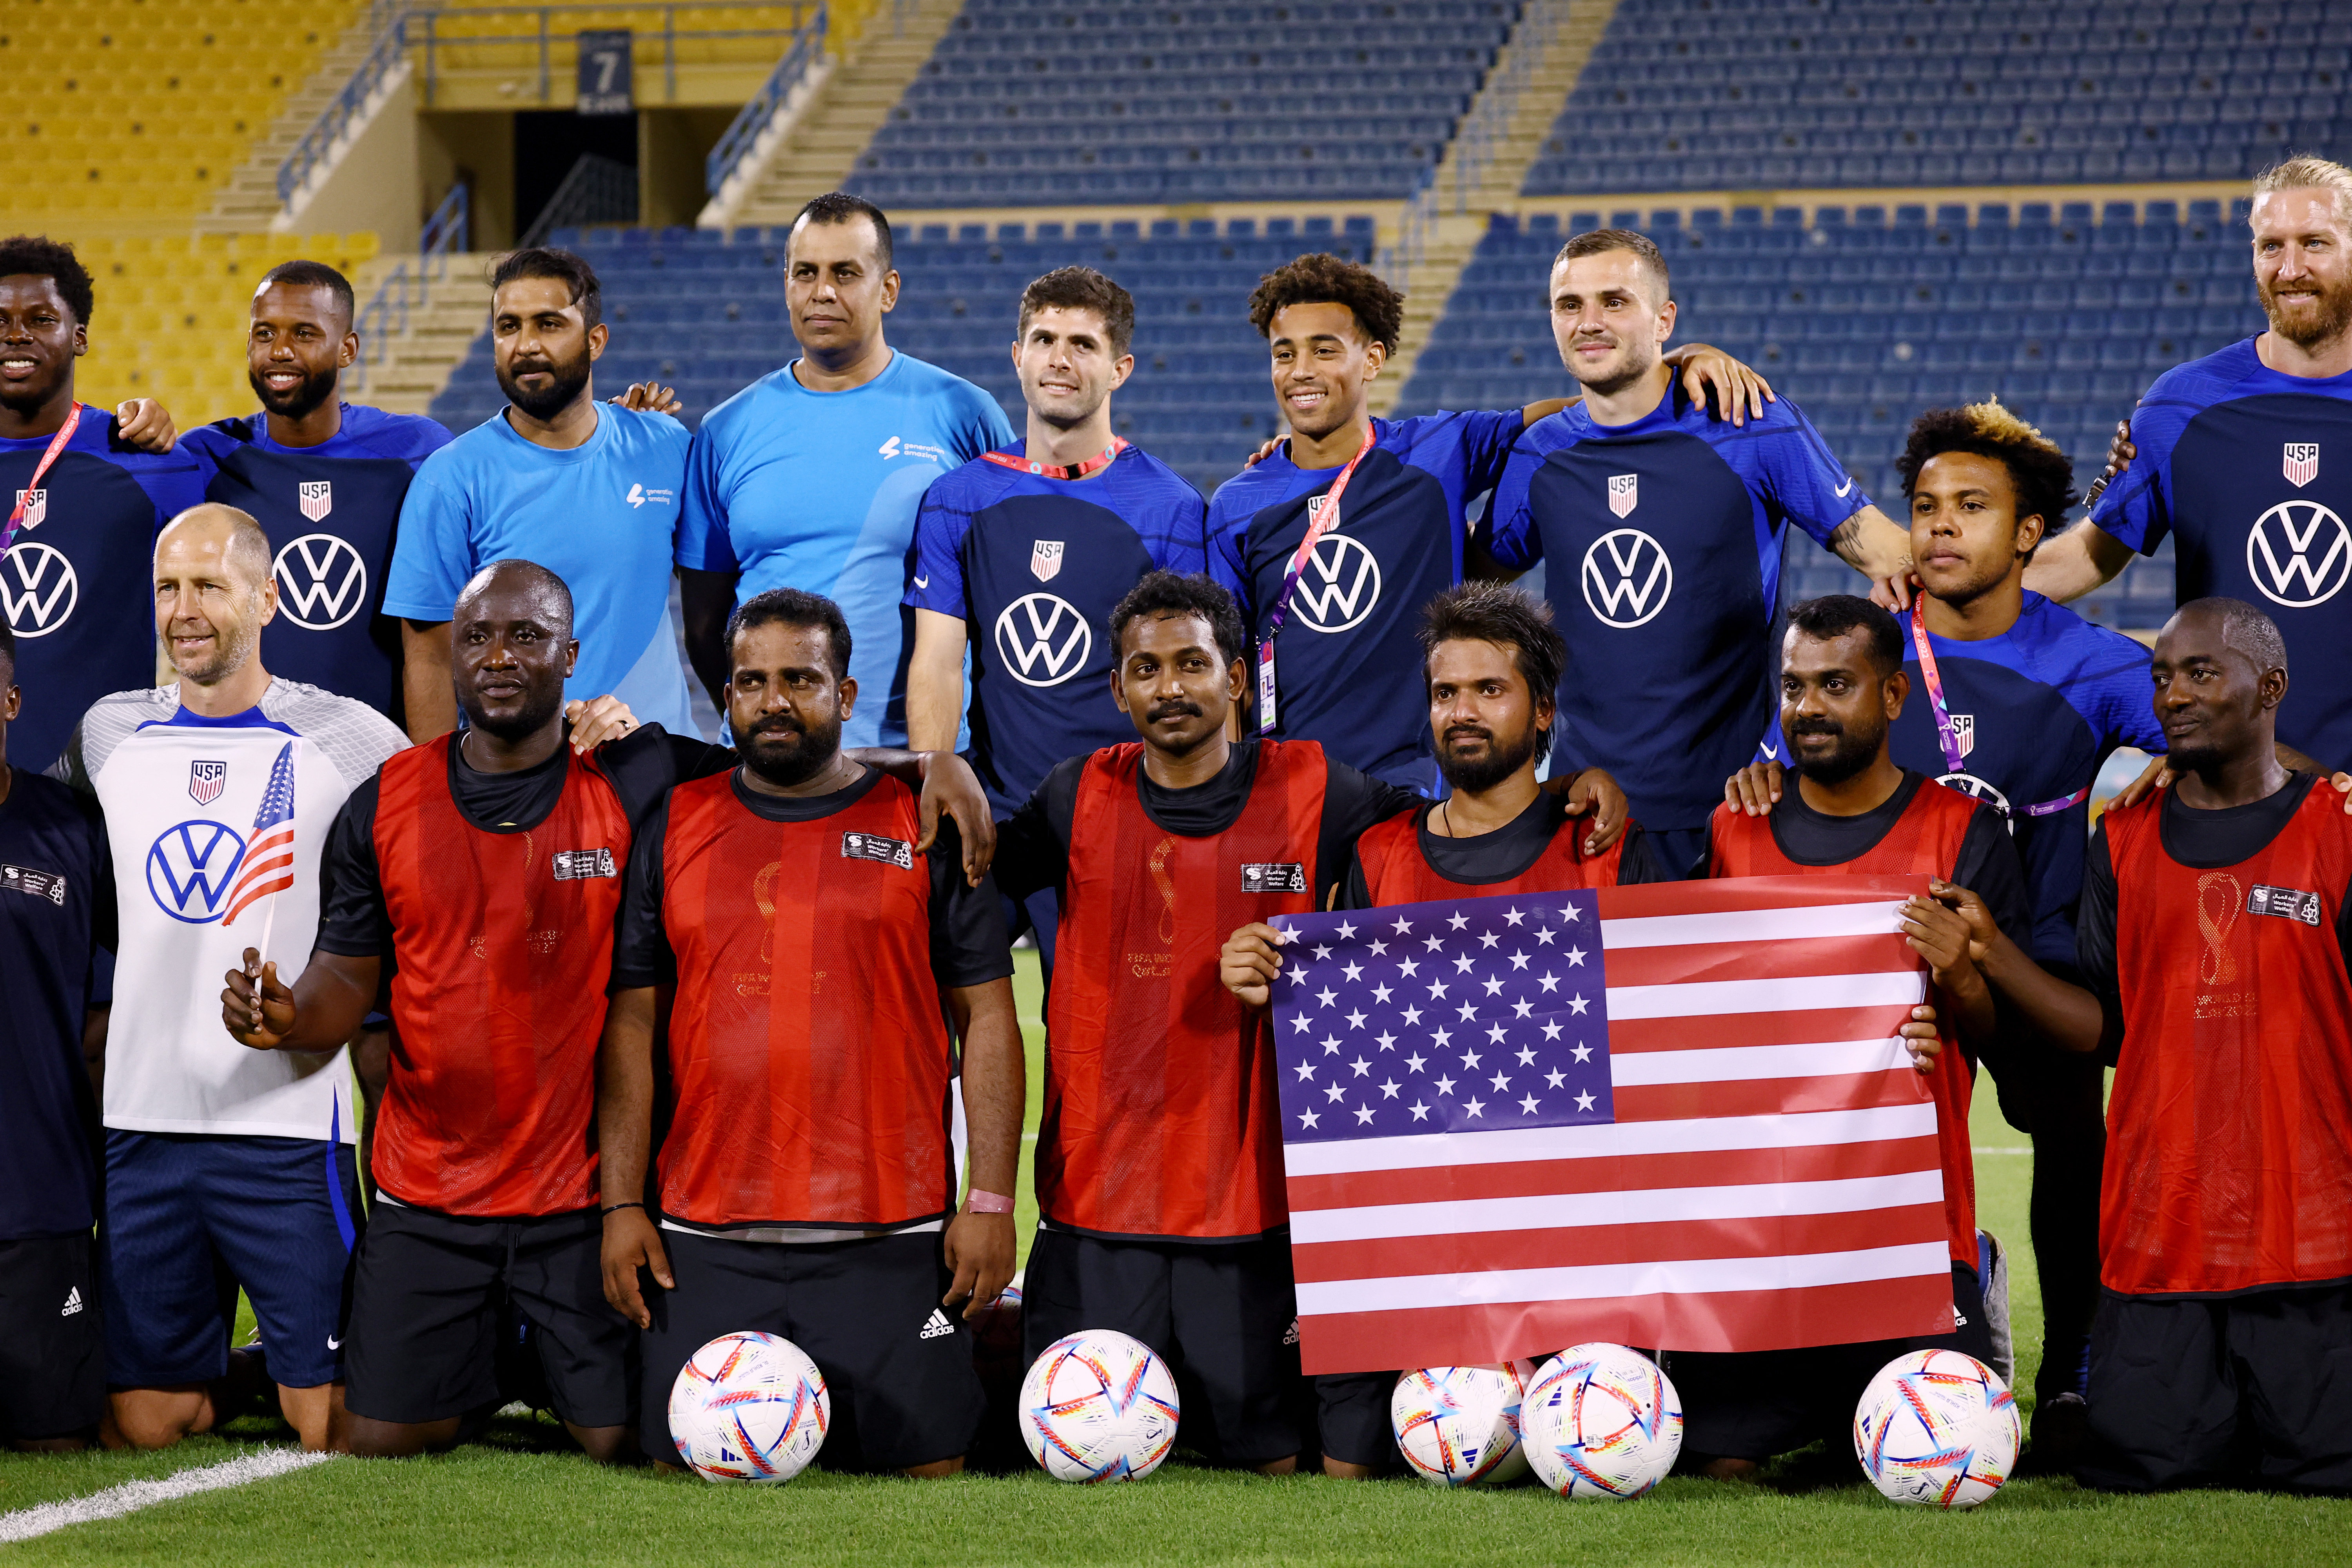 Soccer Football - FIFA World Cup Qatar 2022 - United States hold a welcome event with construction workers - Thani bin Jassim Stadium, Doha, Qatar - November 15, 2022 Christian Pulisic of the US and teammates pose with players from a construction workers team REUTERS/Kai Pfaffenbach